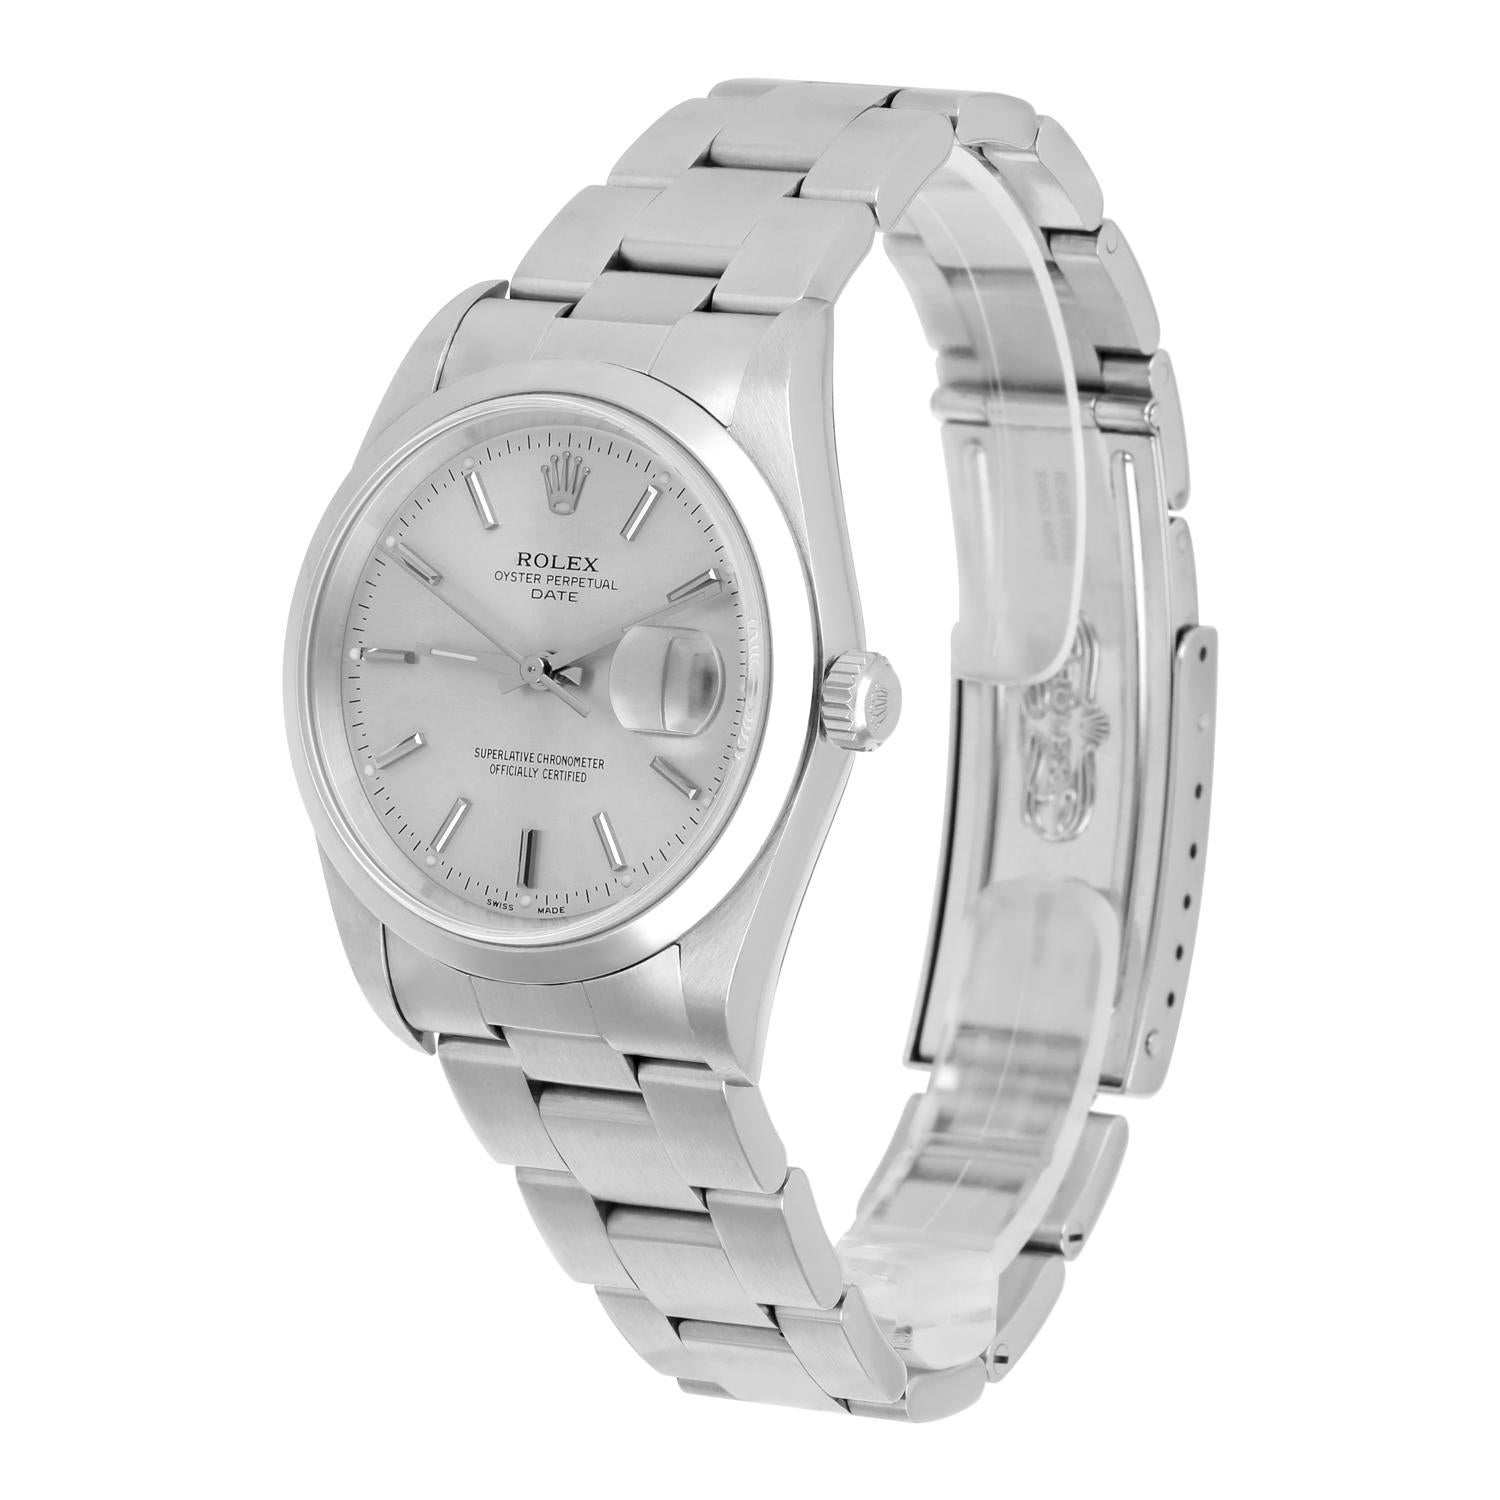 Rolex Date 34mm Stainless Steel Watch Oyster Band Silver Dial Circa 2001 15200 Unisexe en vente